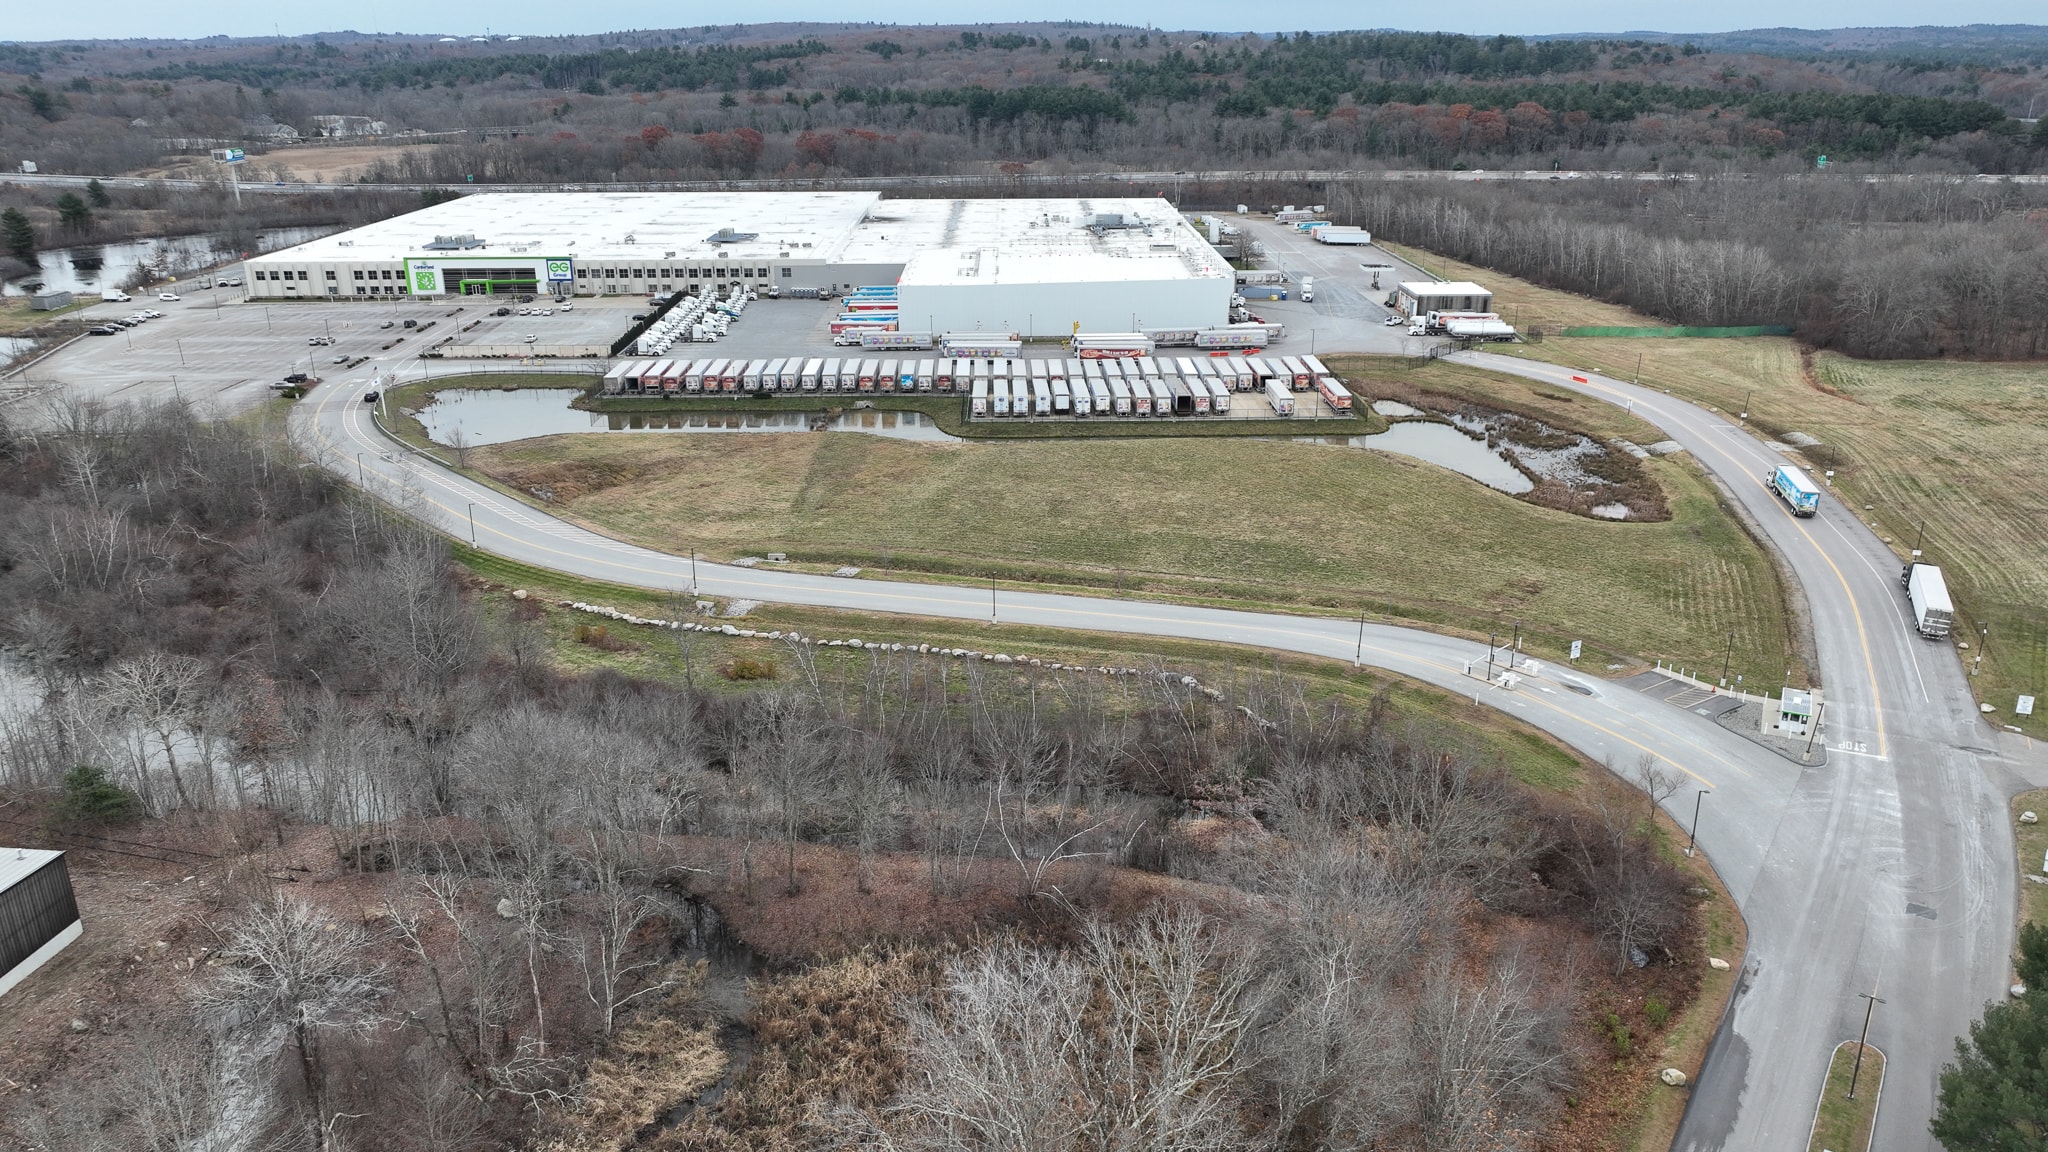 Drone photography recently showed the Cumberland Farms/EG Group facility at 165 Flanders Road in Westborough. EG, which acquired Cumberland Farms in 2019,is looking to expand the parking lot at its Westborough facility. (Photo/Tami White)